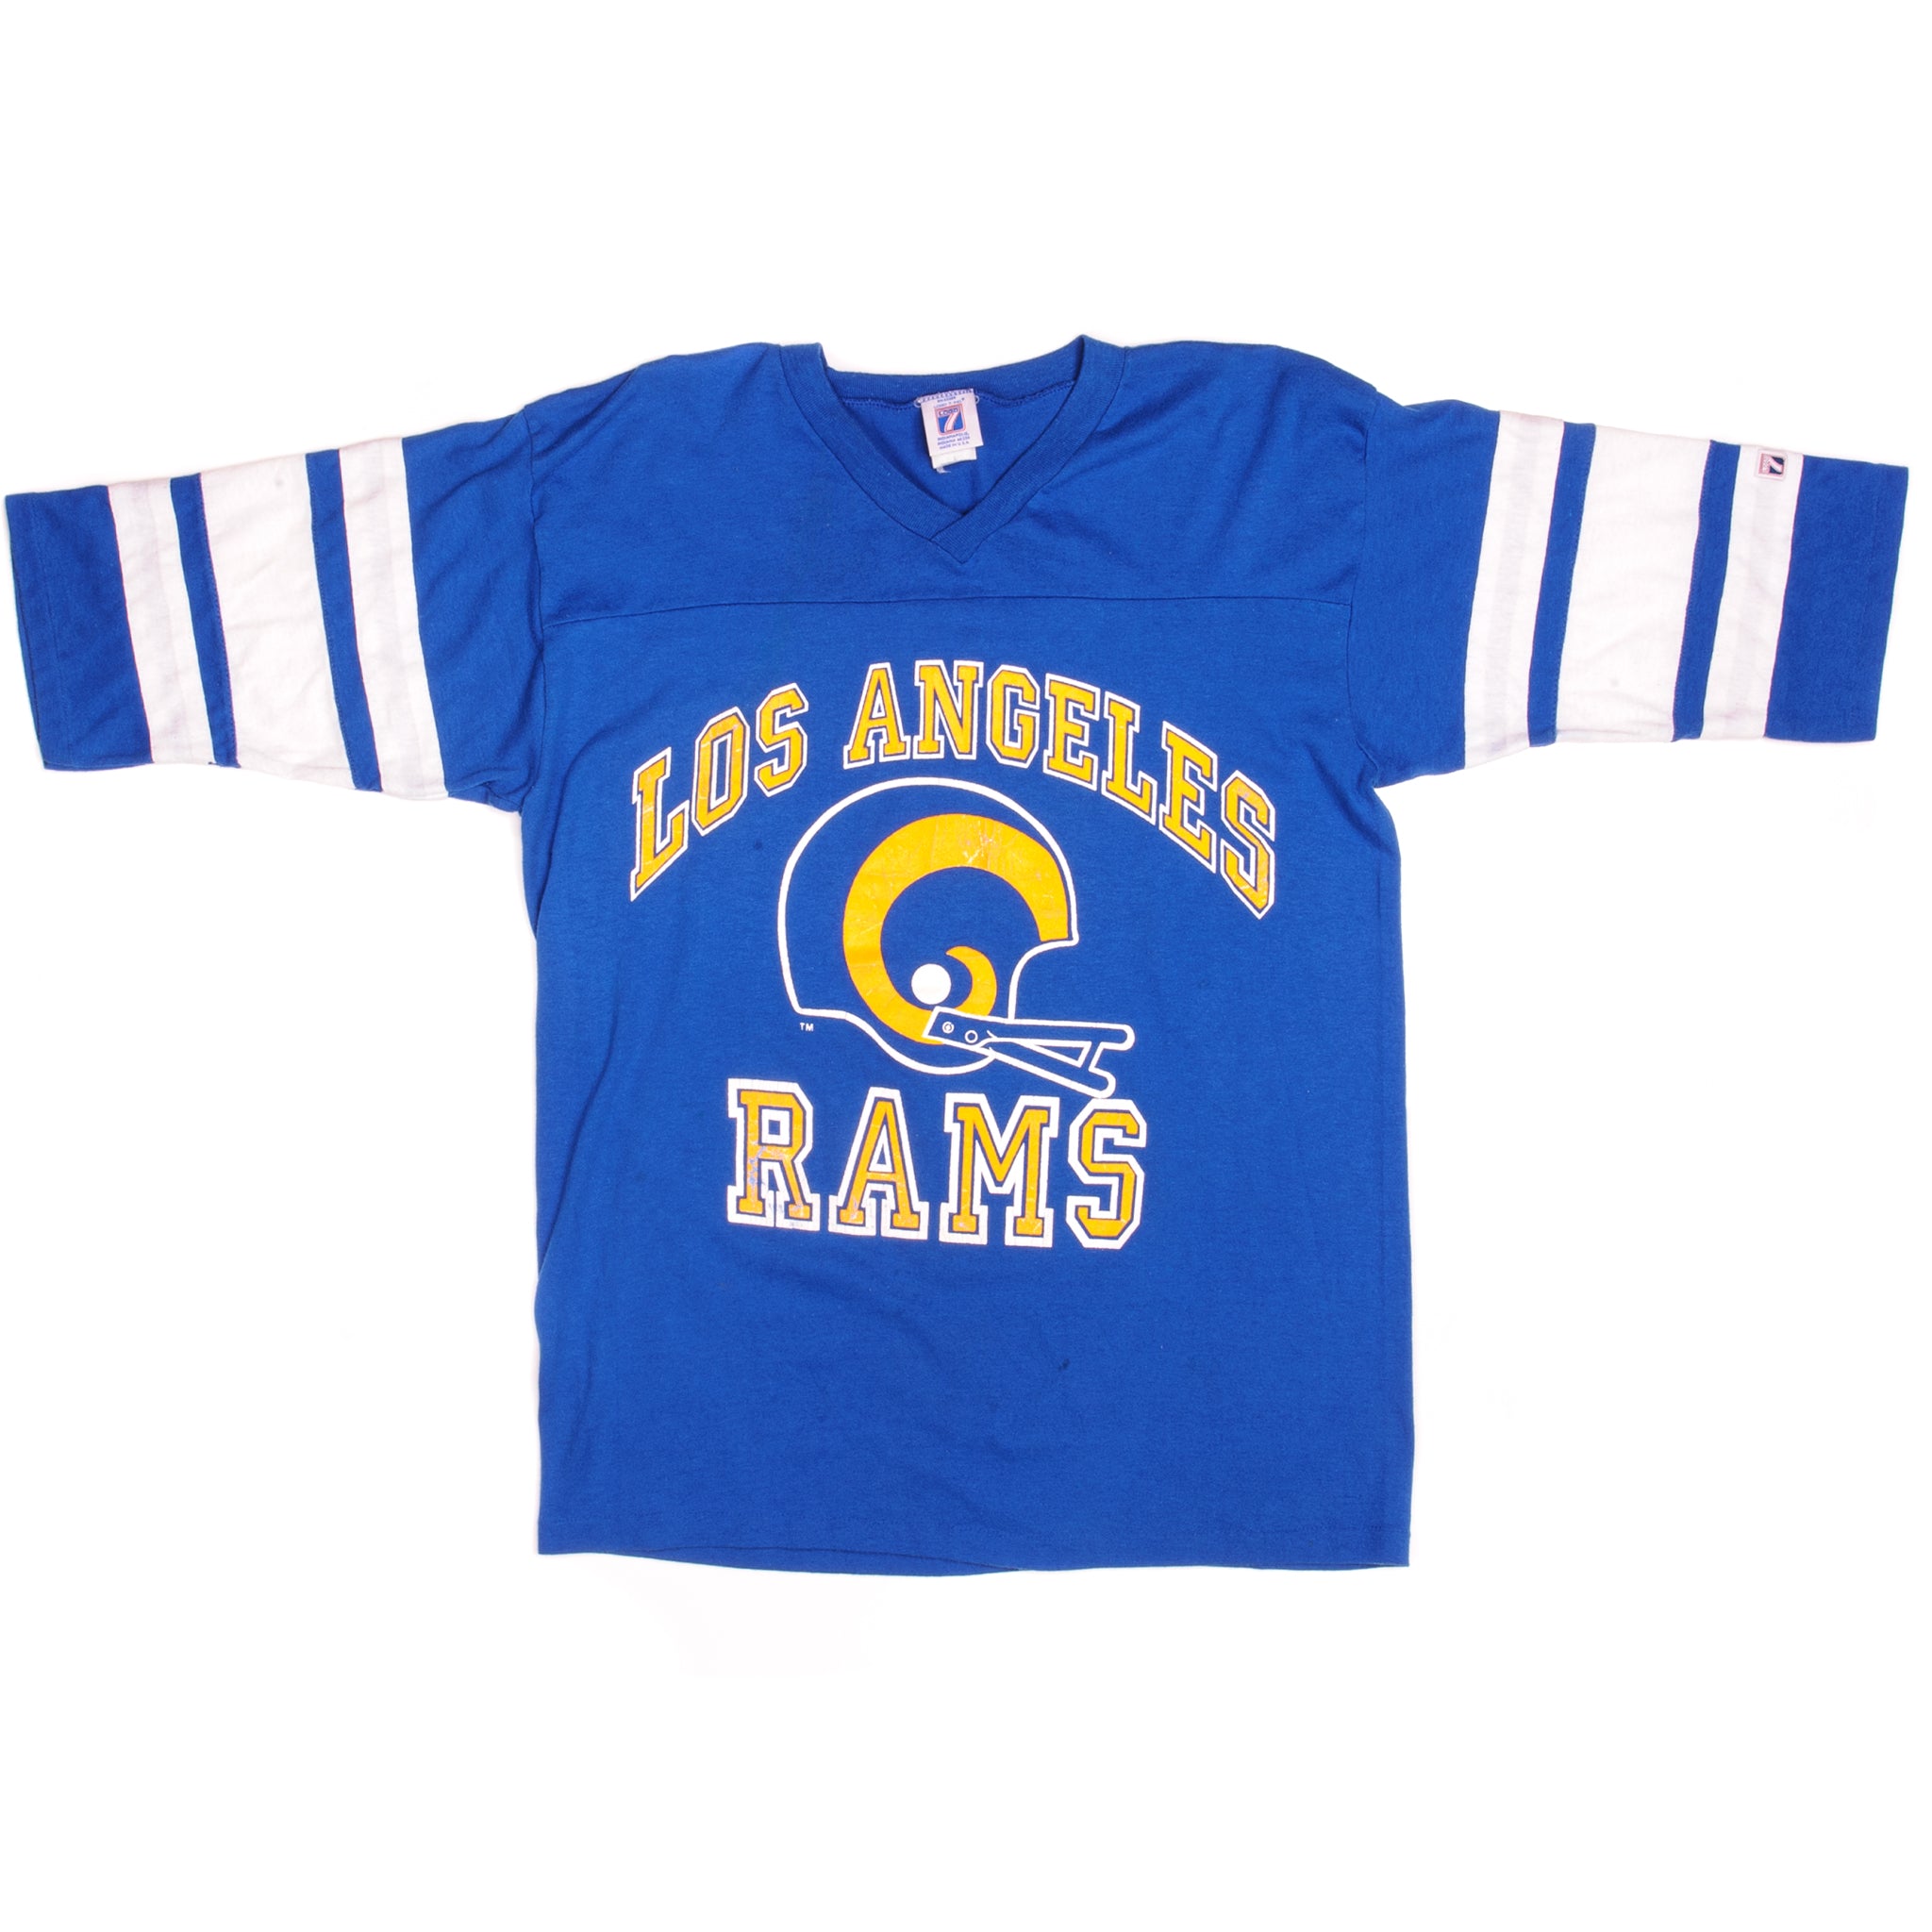 VINTAGE NFL LOS ANGELES RAMS TEE SHIRT SIZE LARGE MADE IN USA 1980s